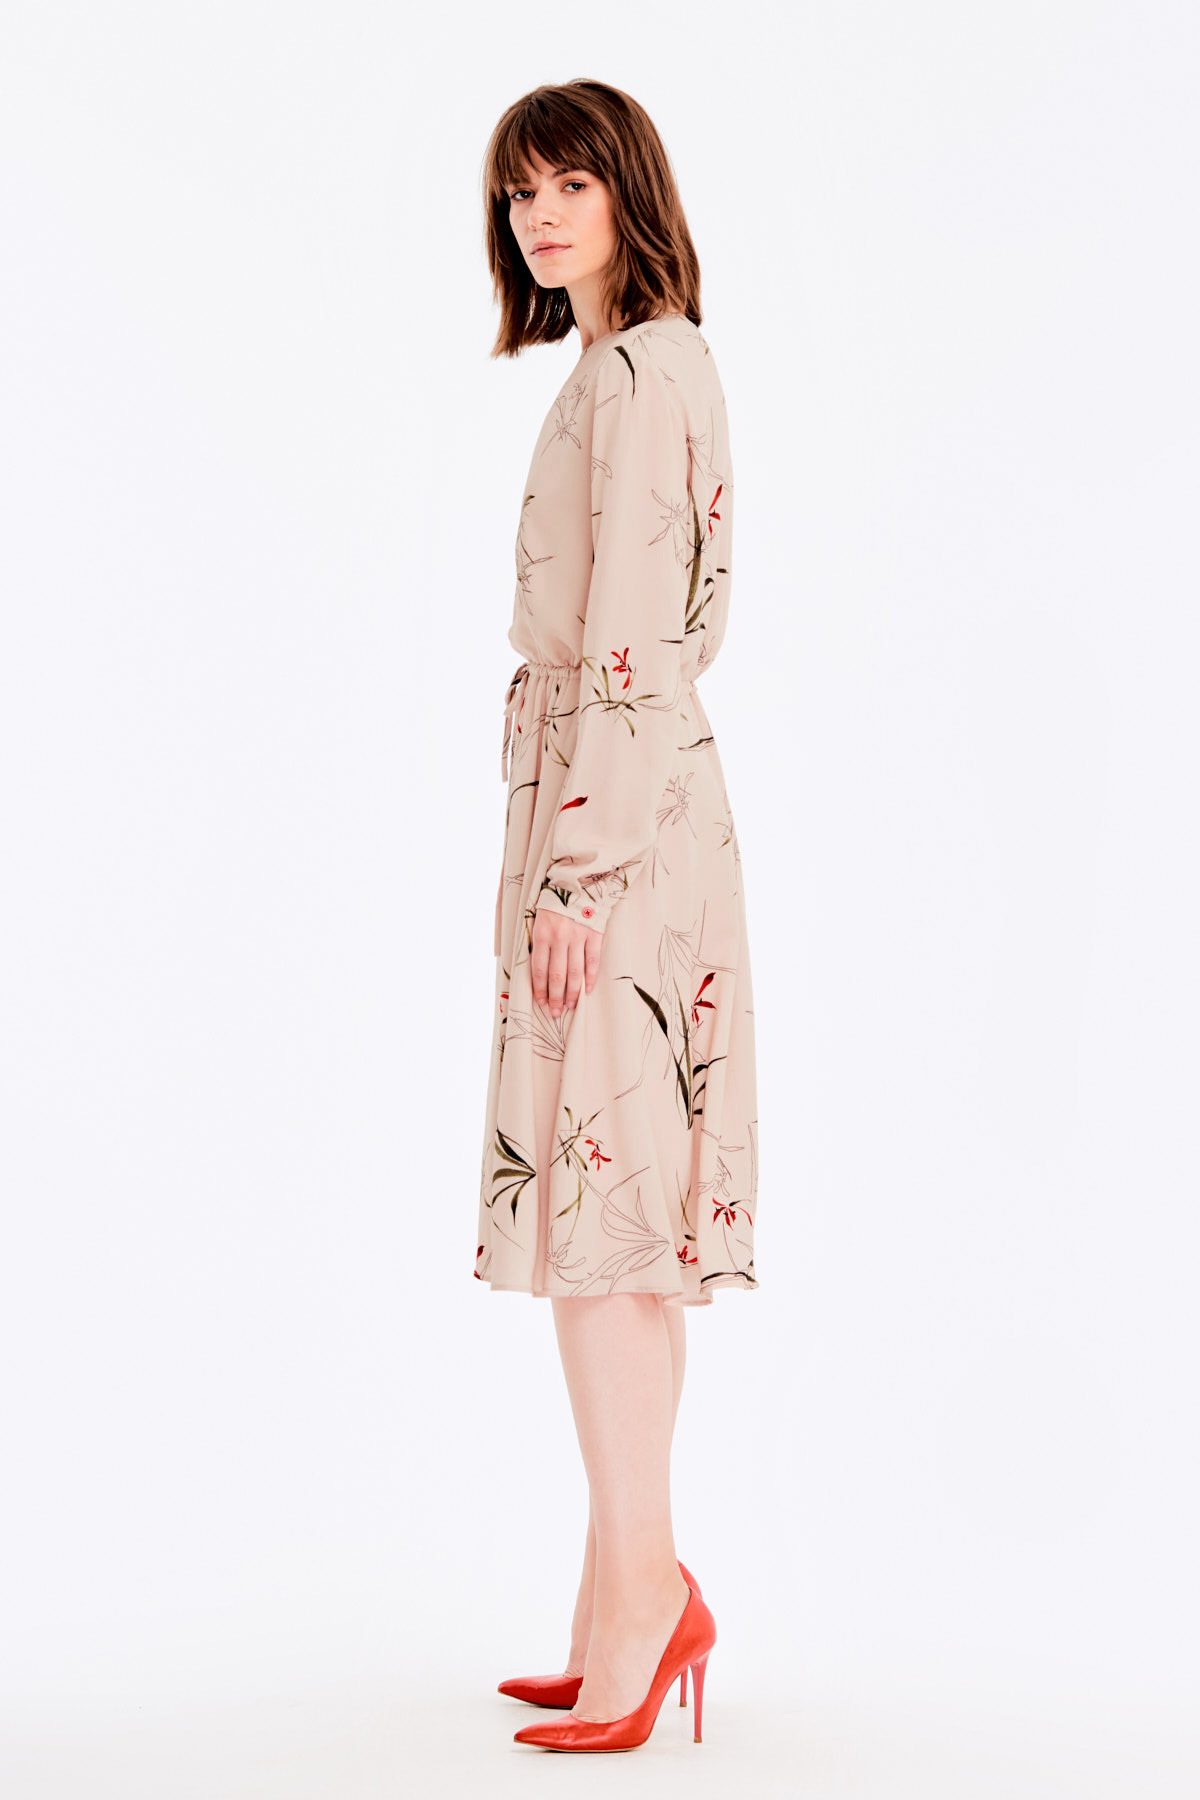 Beige dress with a floral print and ties, photo 4